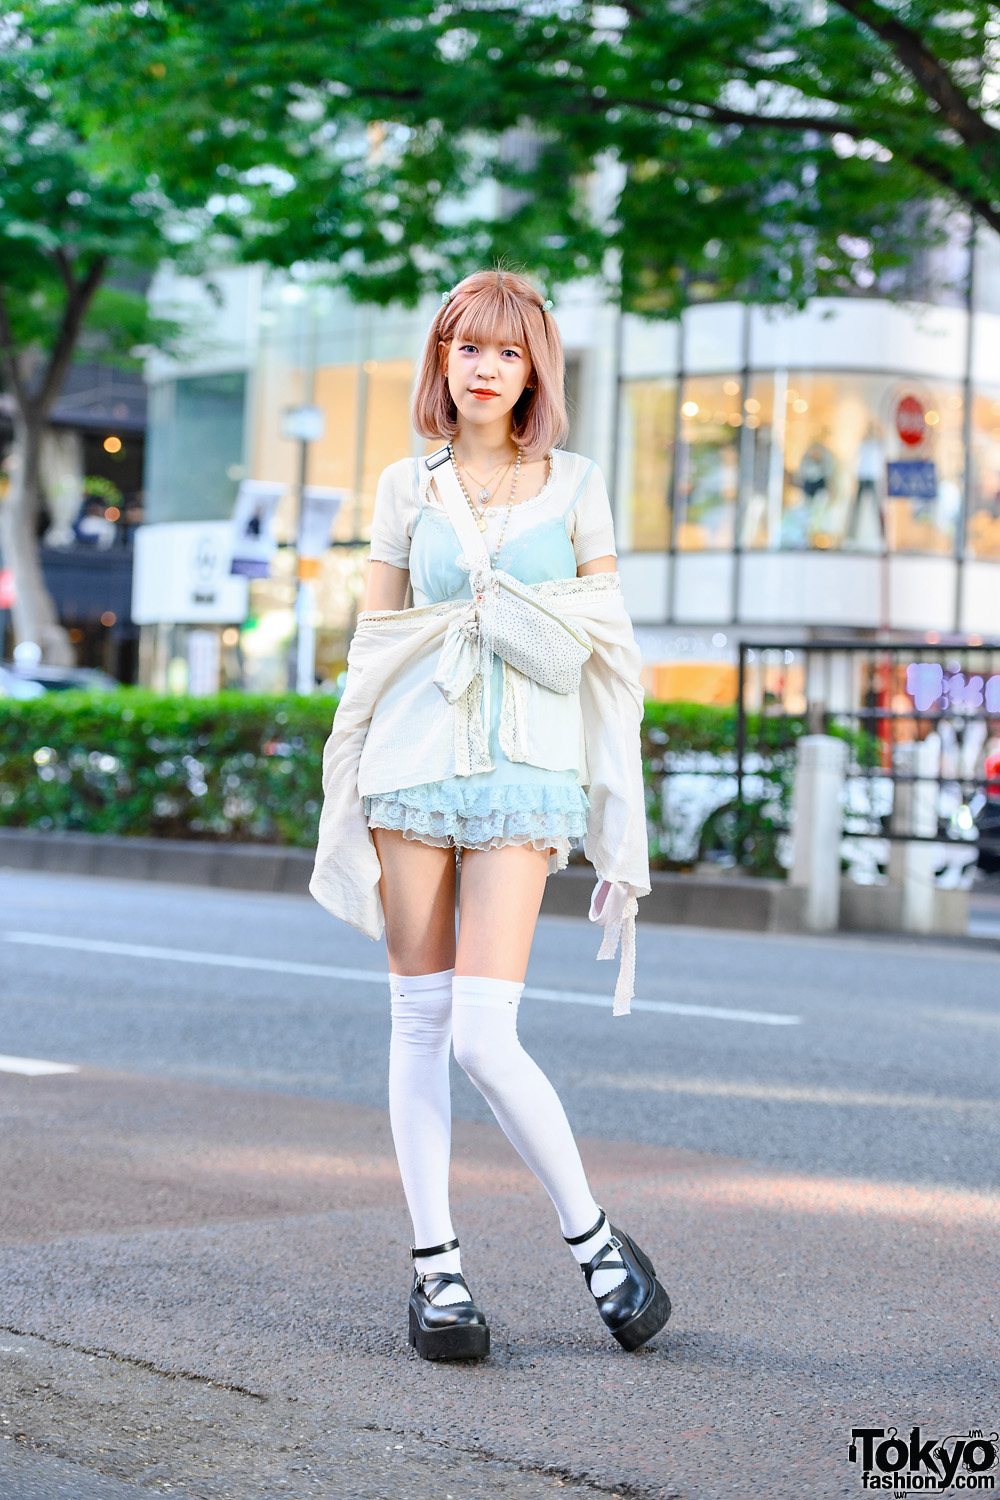 Vintage Pastel Street Style by Parca Silky Designer in Tokyo w/ Pink Hair, Lace Camisole, Lace Shorts, Polka Dot Waist Bag & Baby Doll Shoes